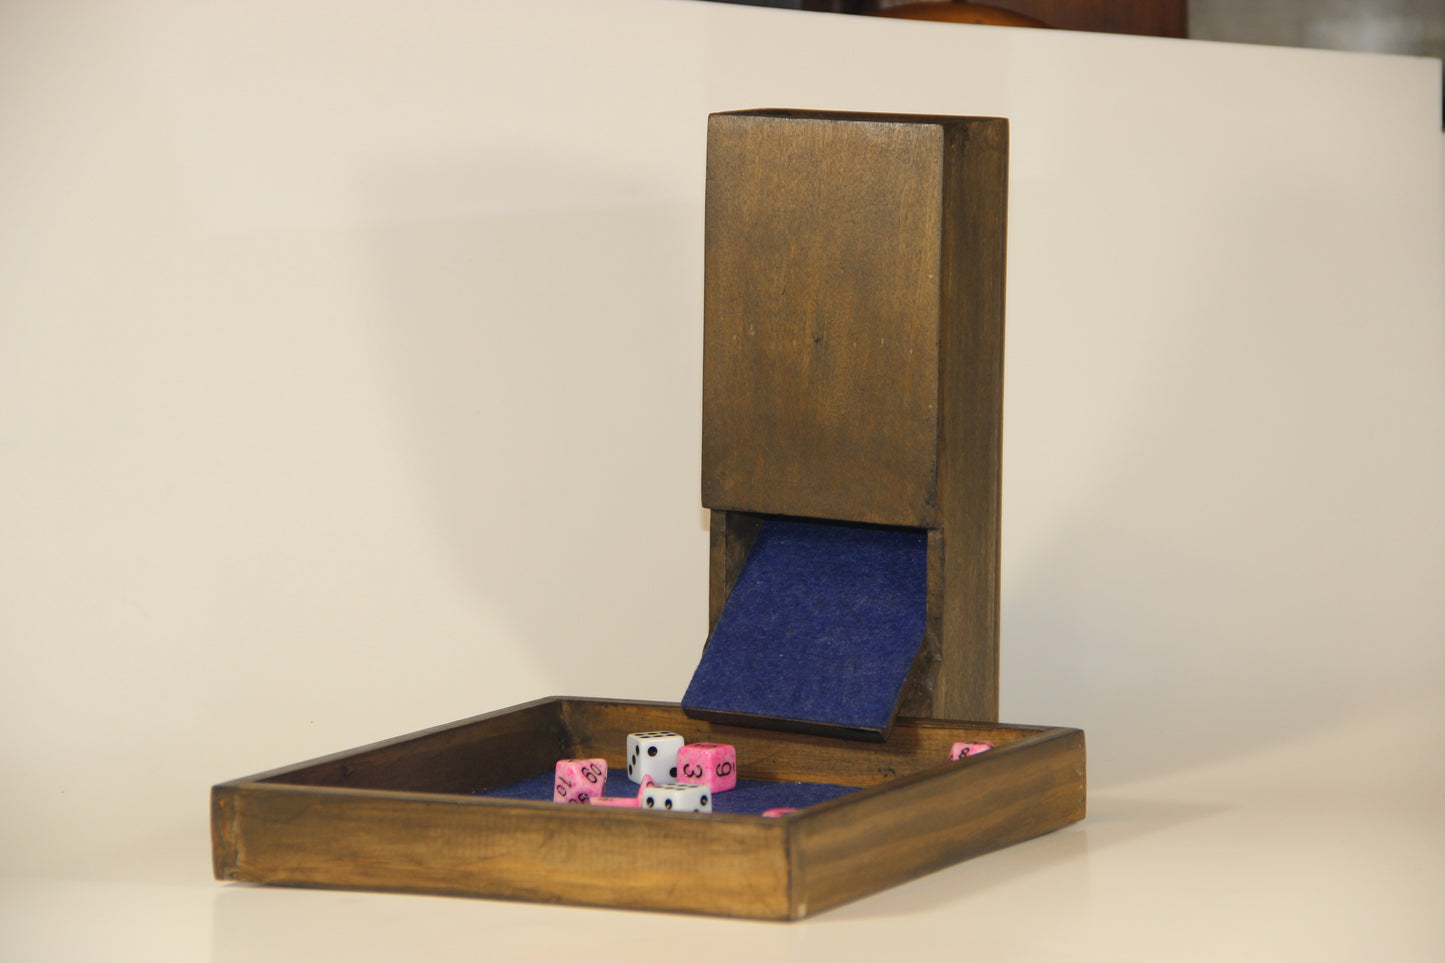 Handmade Wood Dice Tower & Tray Set with Magnets, Good for Regular Dice and D20